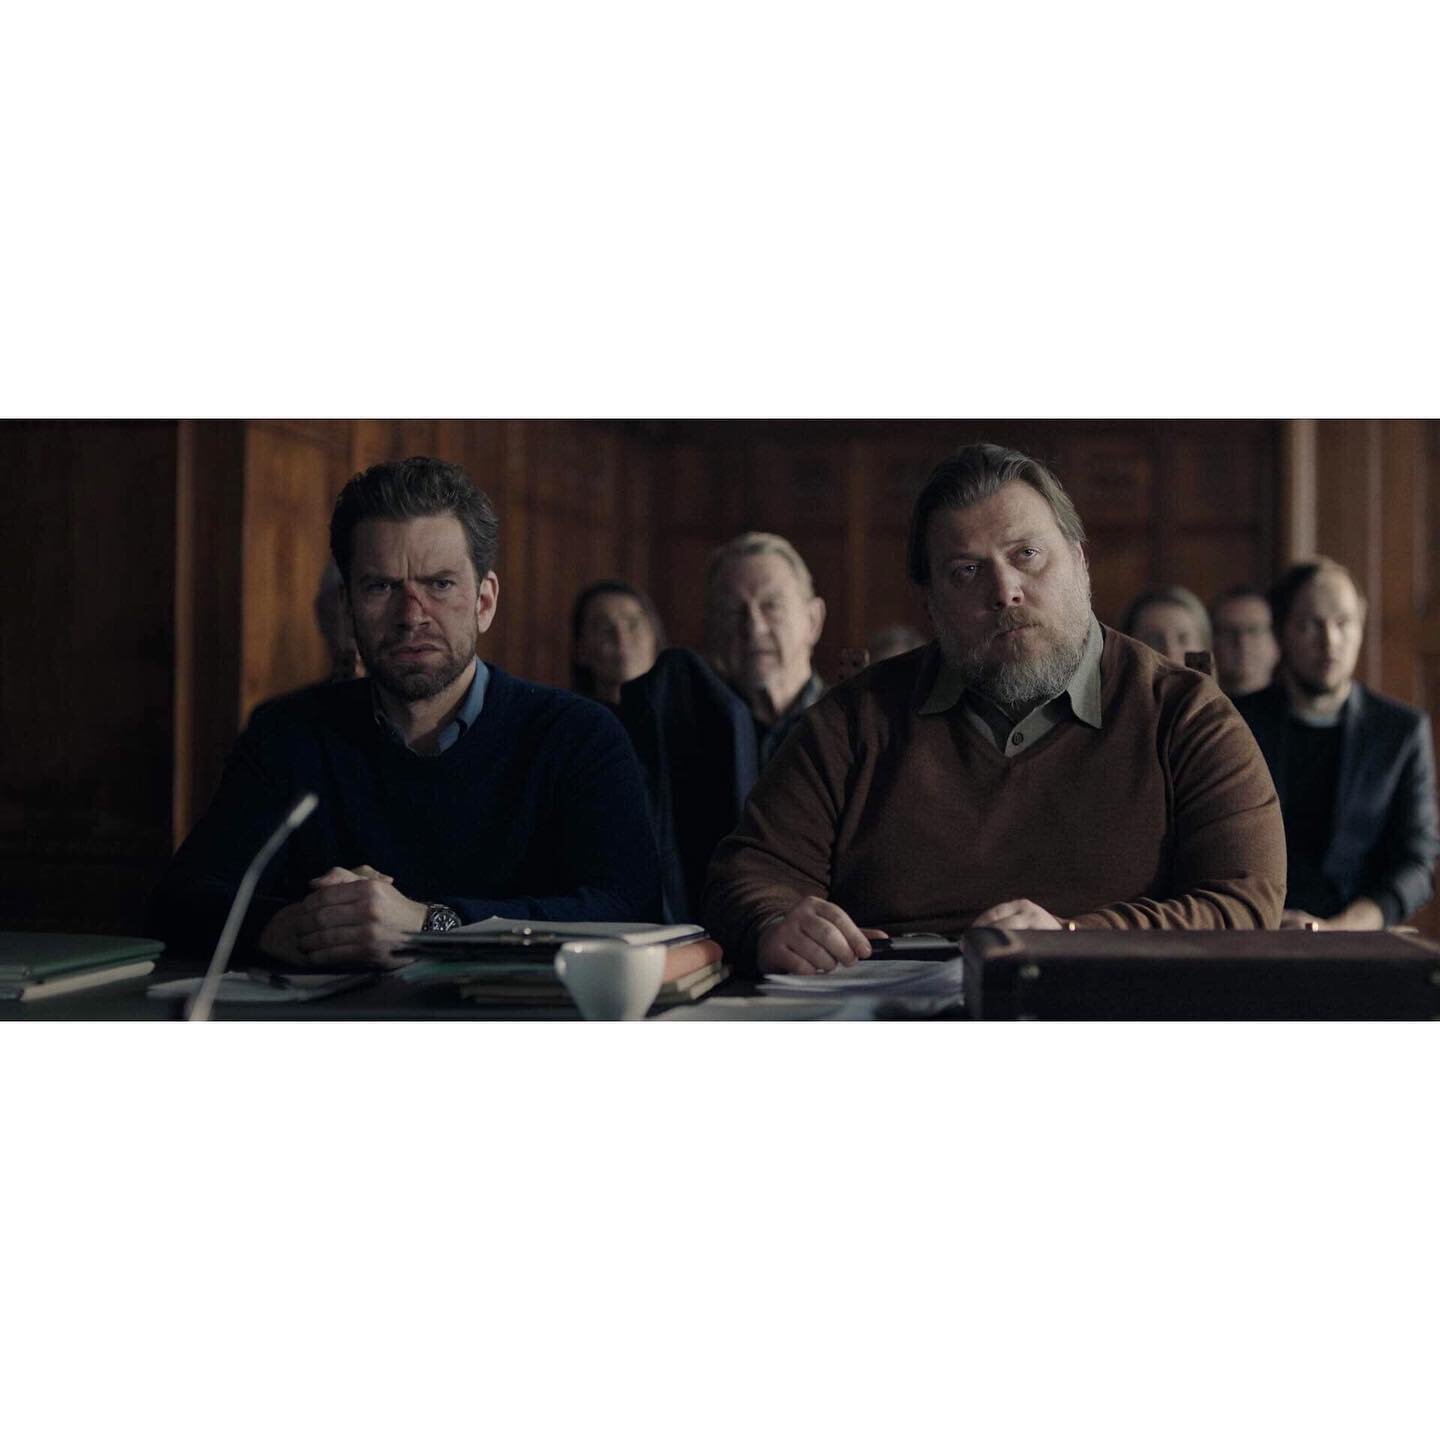 KOLLISION | Dir. @mehdiavaz | @niggolaj and #nicolasbro awaiting their fate. #cinematography

The Avaz bros wanted an American-looking courtroom as most Danish courts look more like traditional offices. We shot on the third floor of a museum and the 